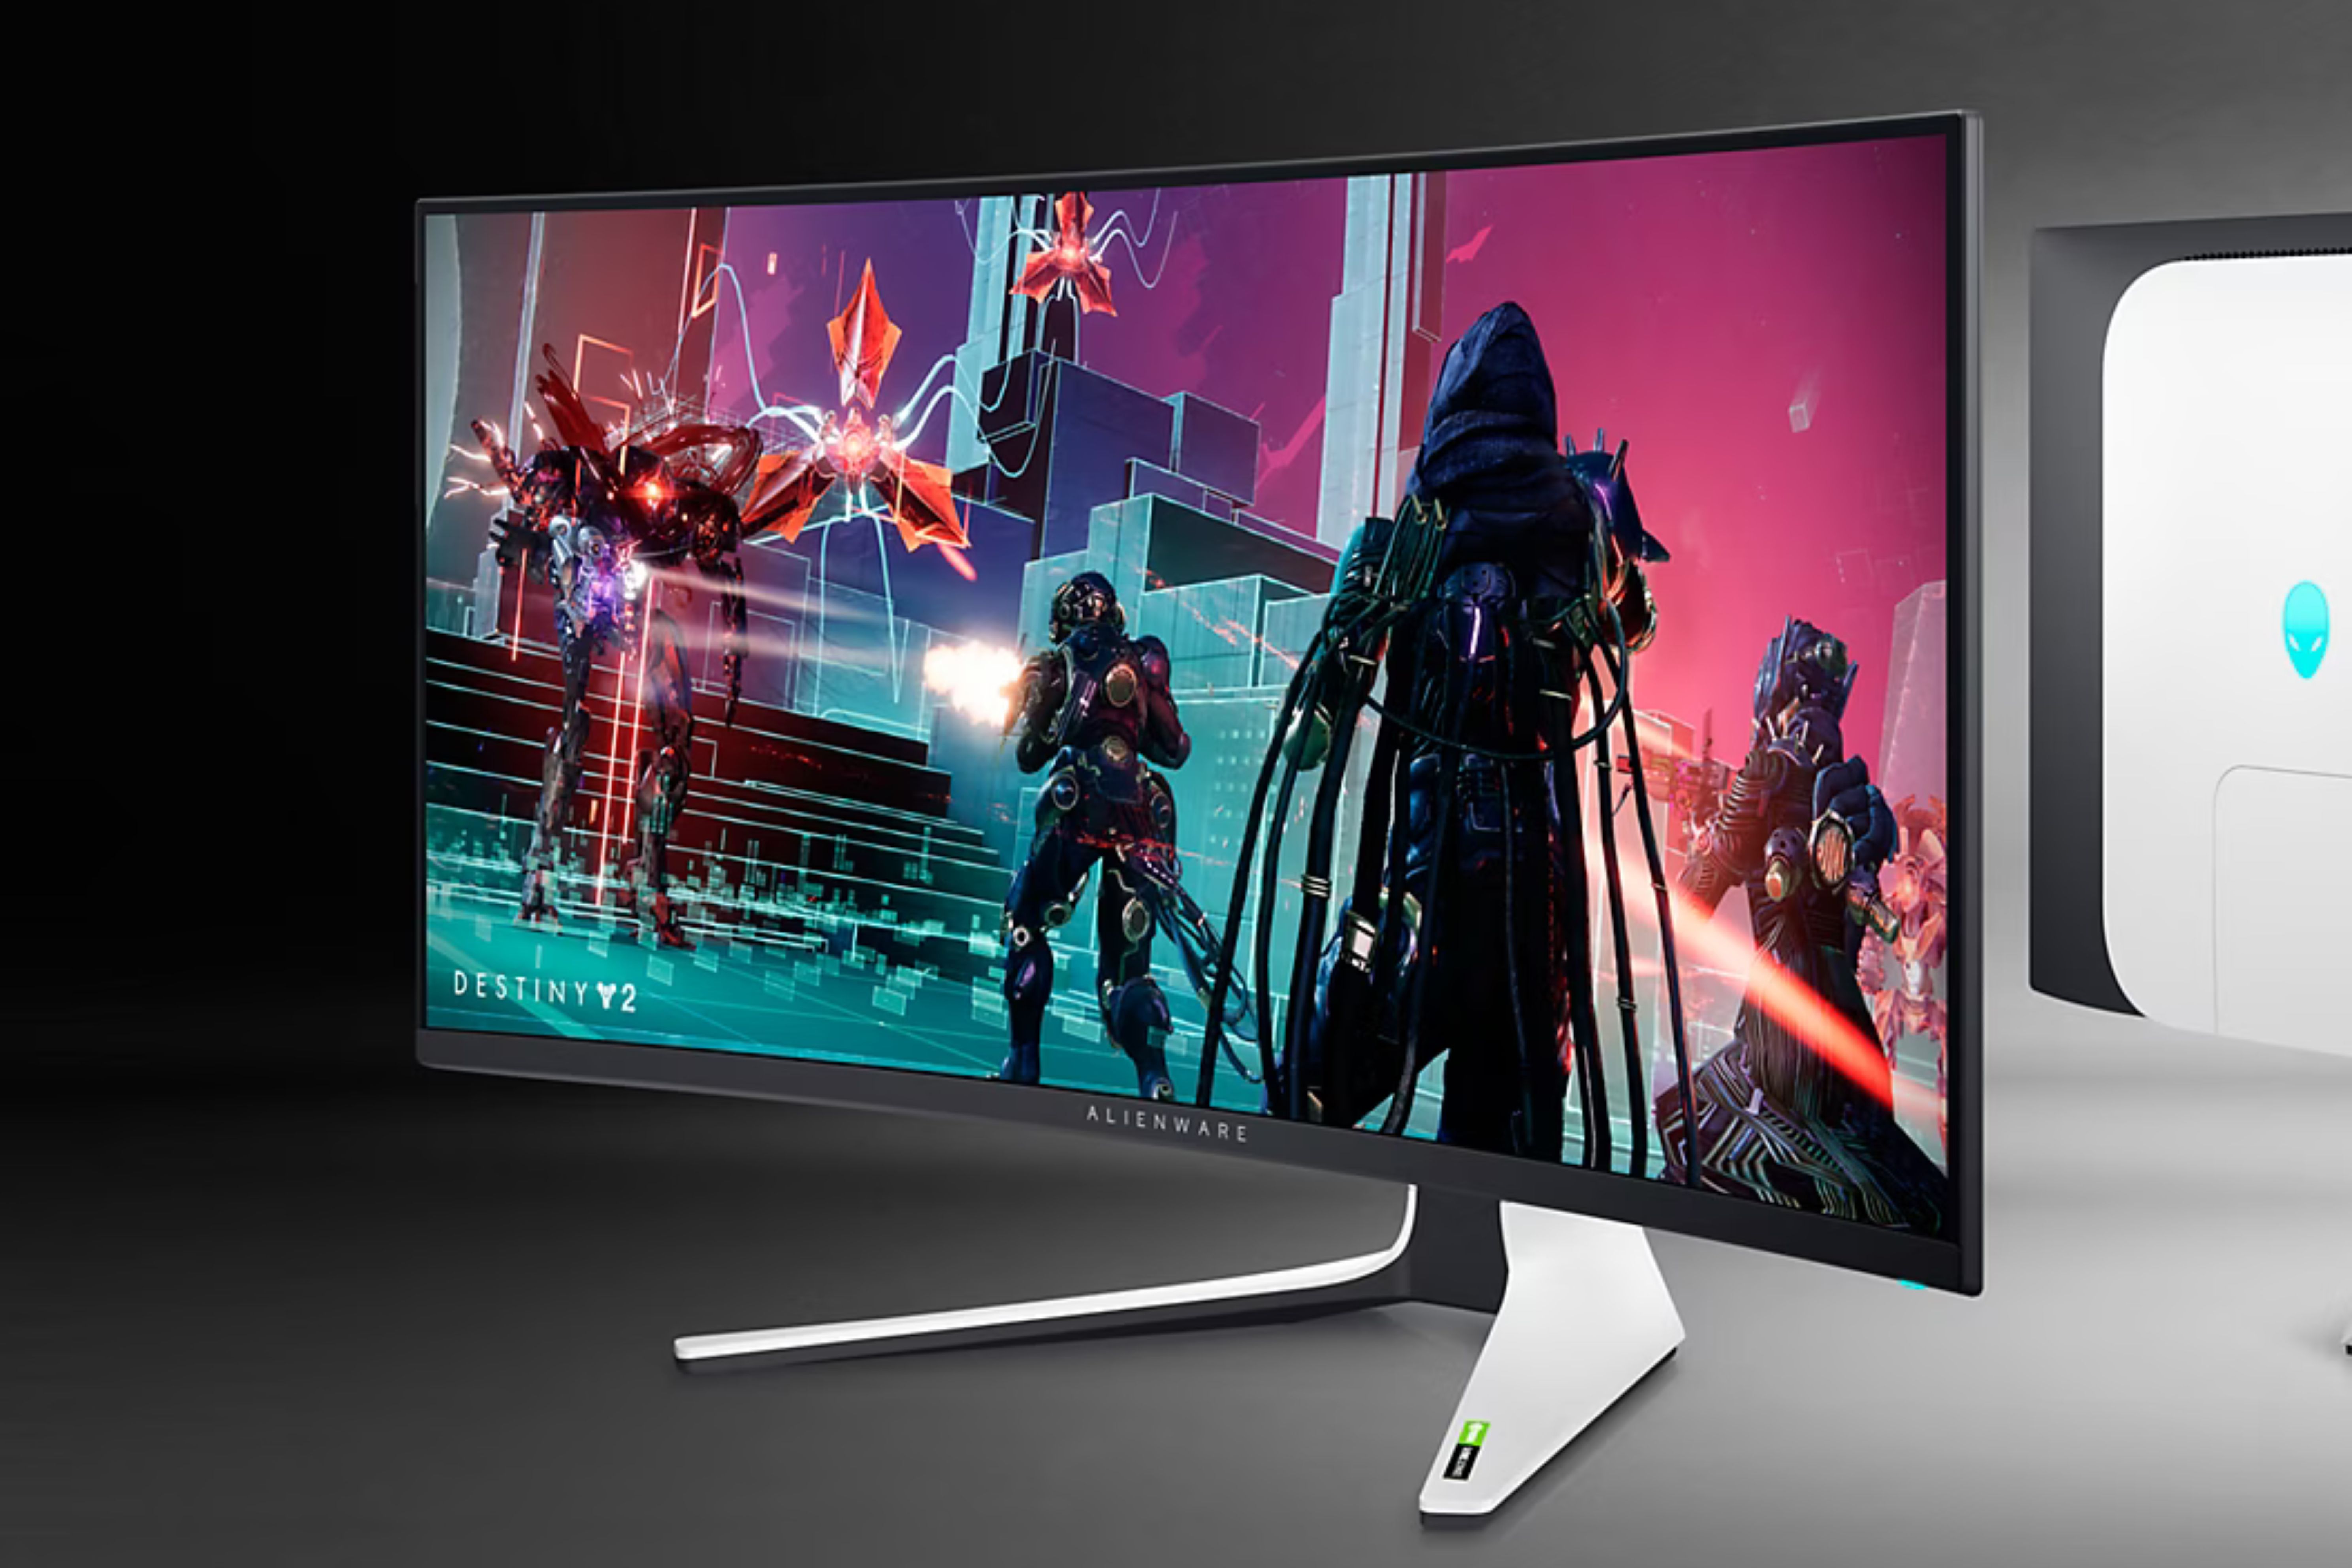 A promo image of the AW3423DW gaming monitor from Alienware.